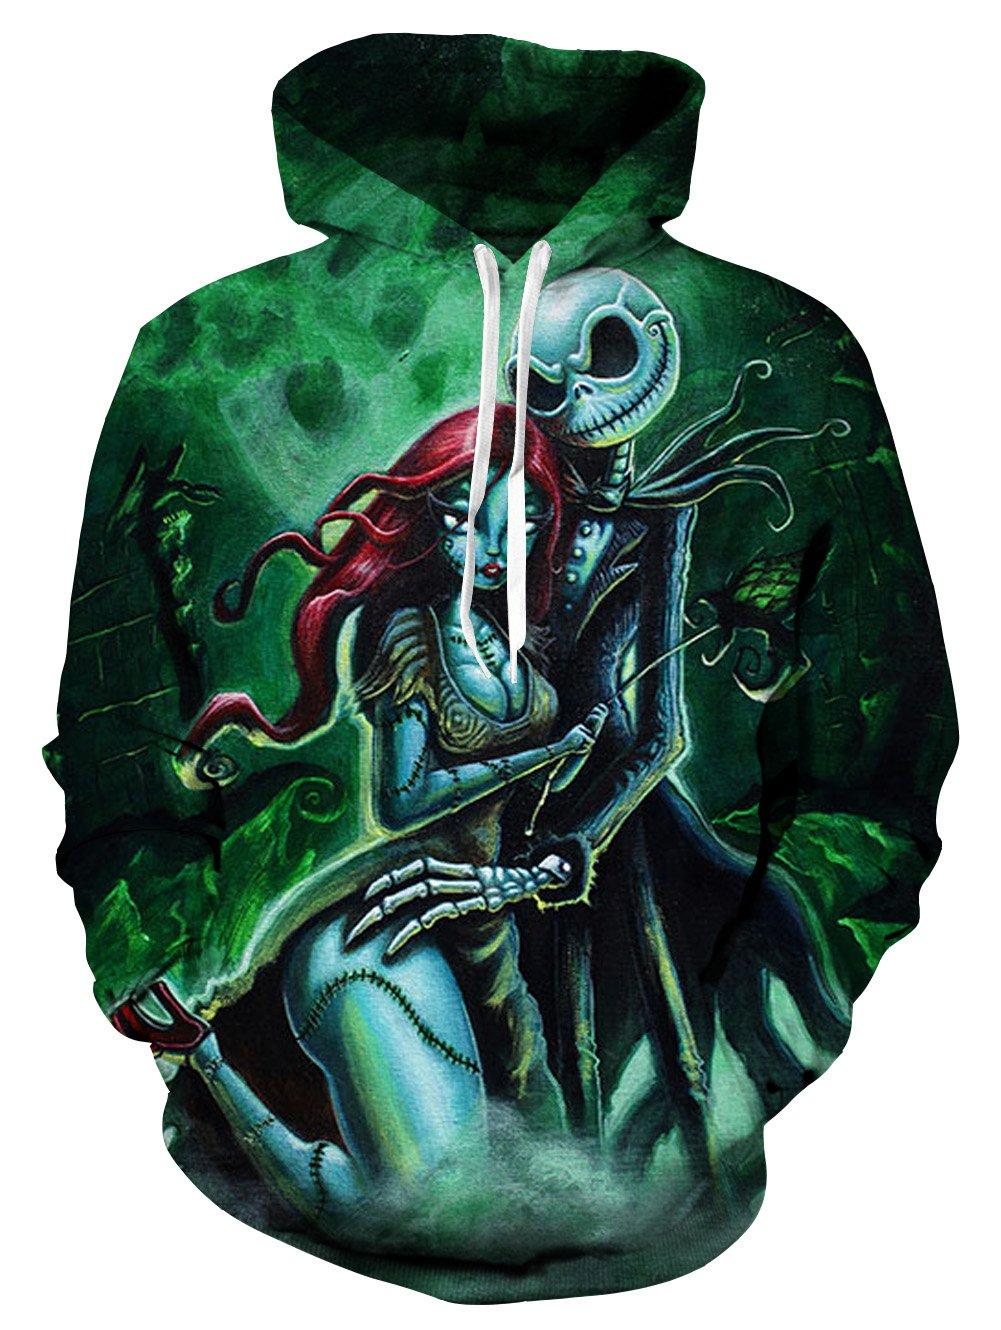 The nightmare before christmas jack skellington and sally halloween 3d hoodie - size S